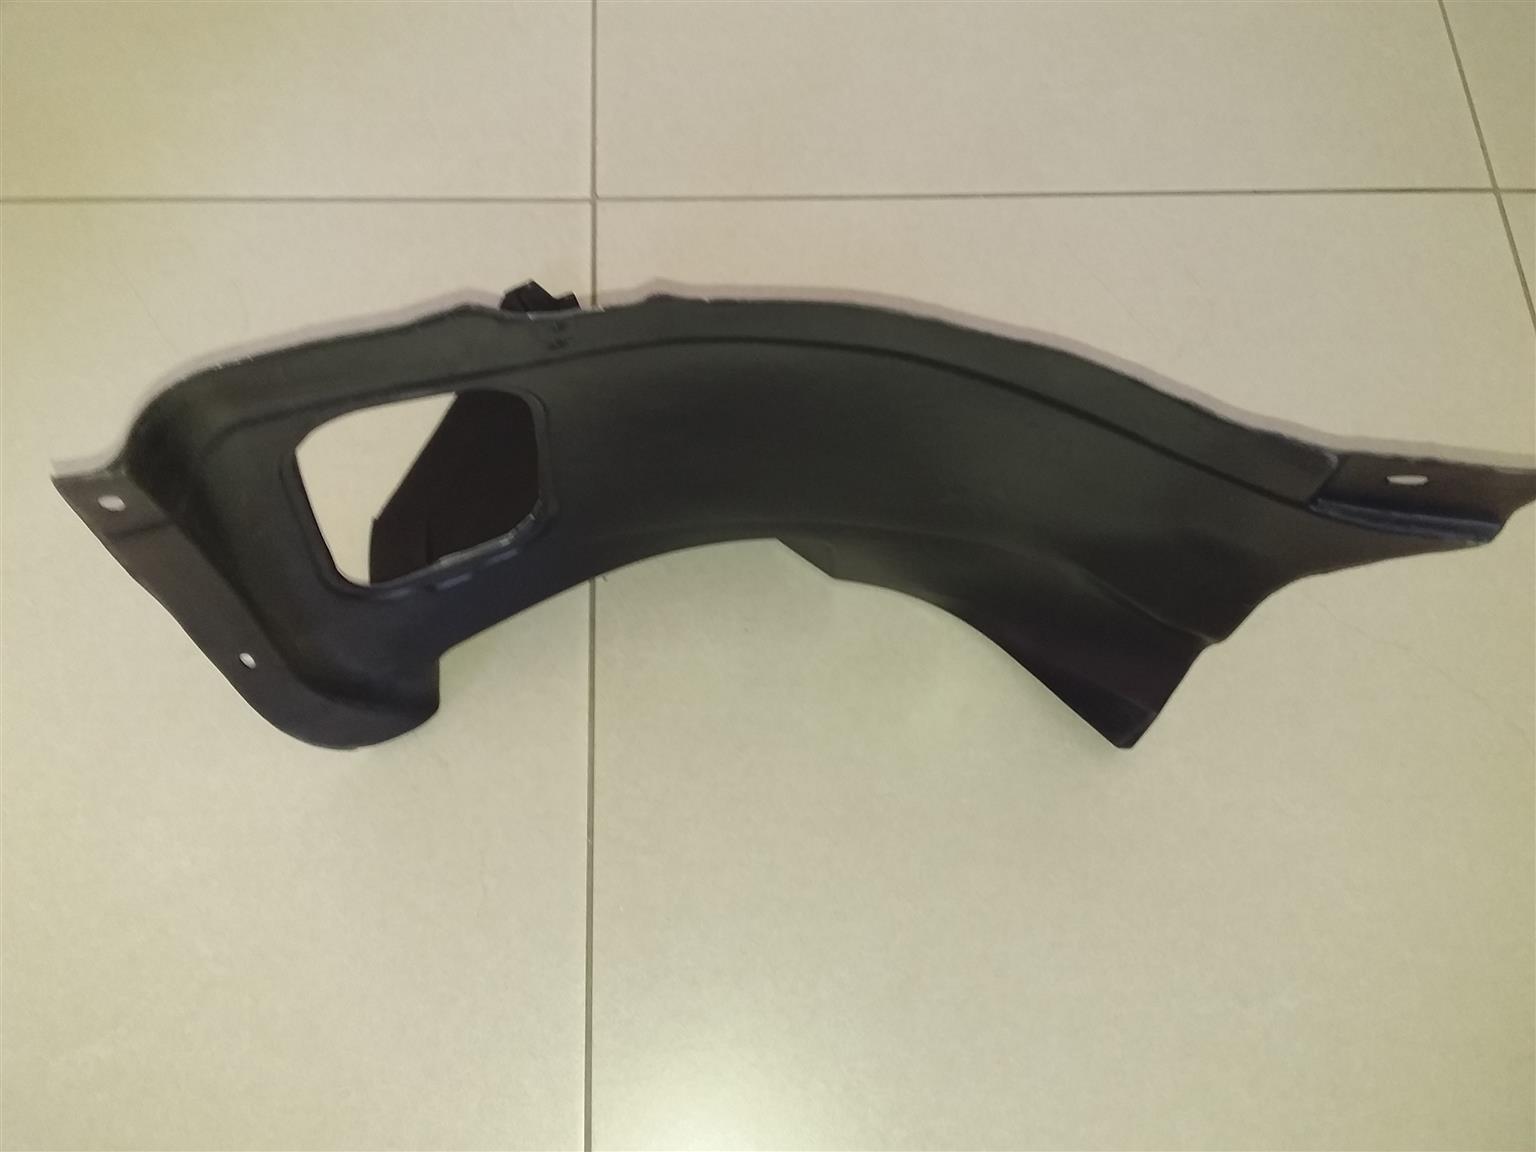 VW GOLF 7 2013 ONWARDS BRAND NEW FRONT FENDER LINERS EXTENSION